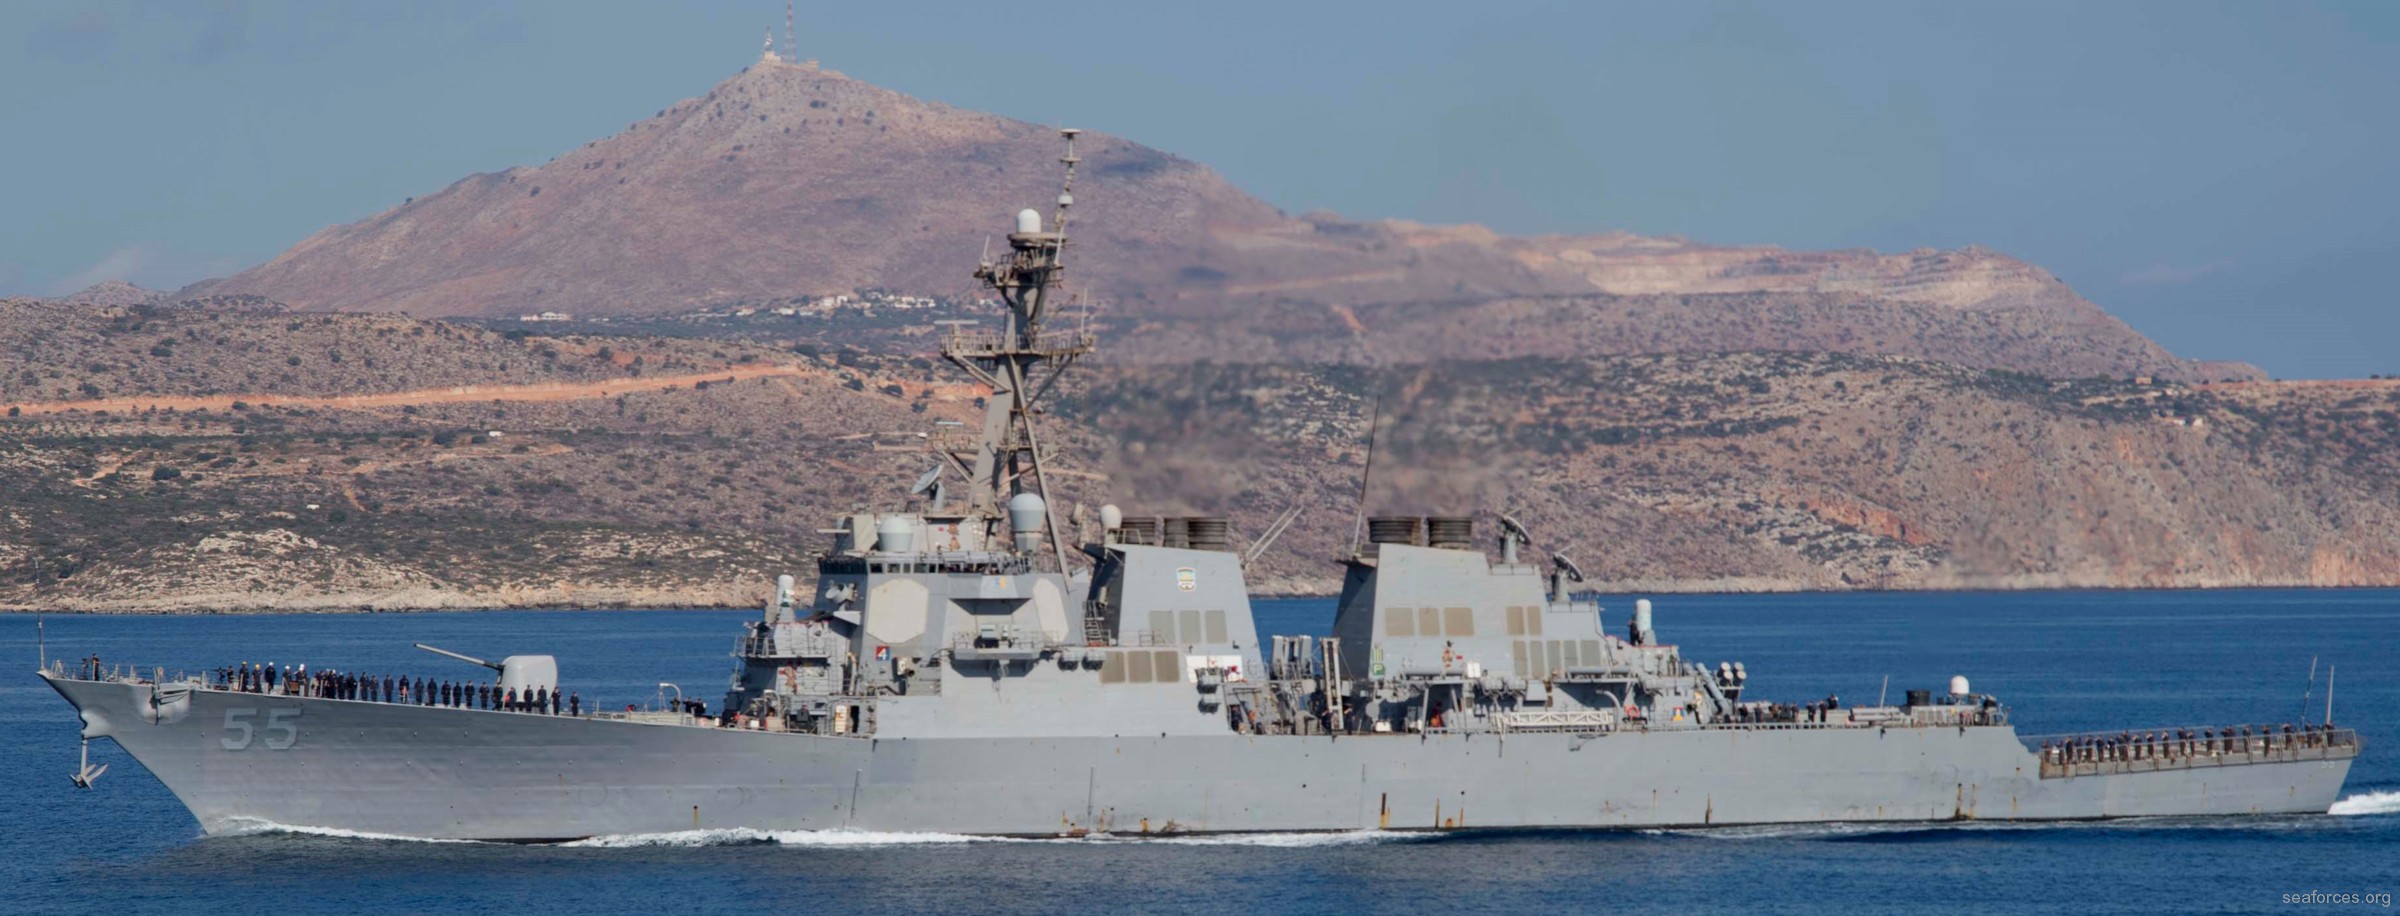 ddg-55 uss stout guided missile destroyer us navy 05 souda bay crete greece